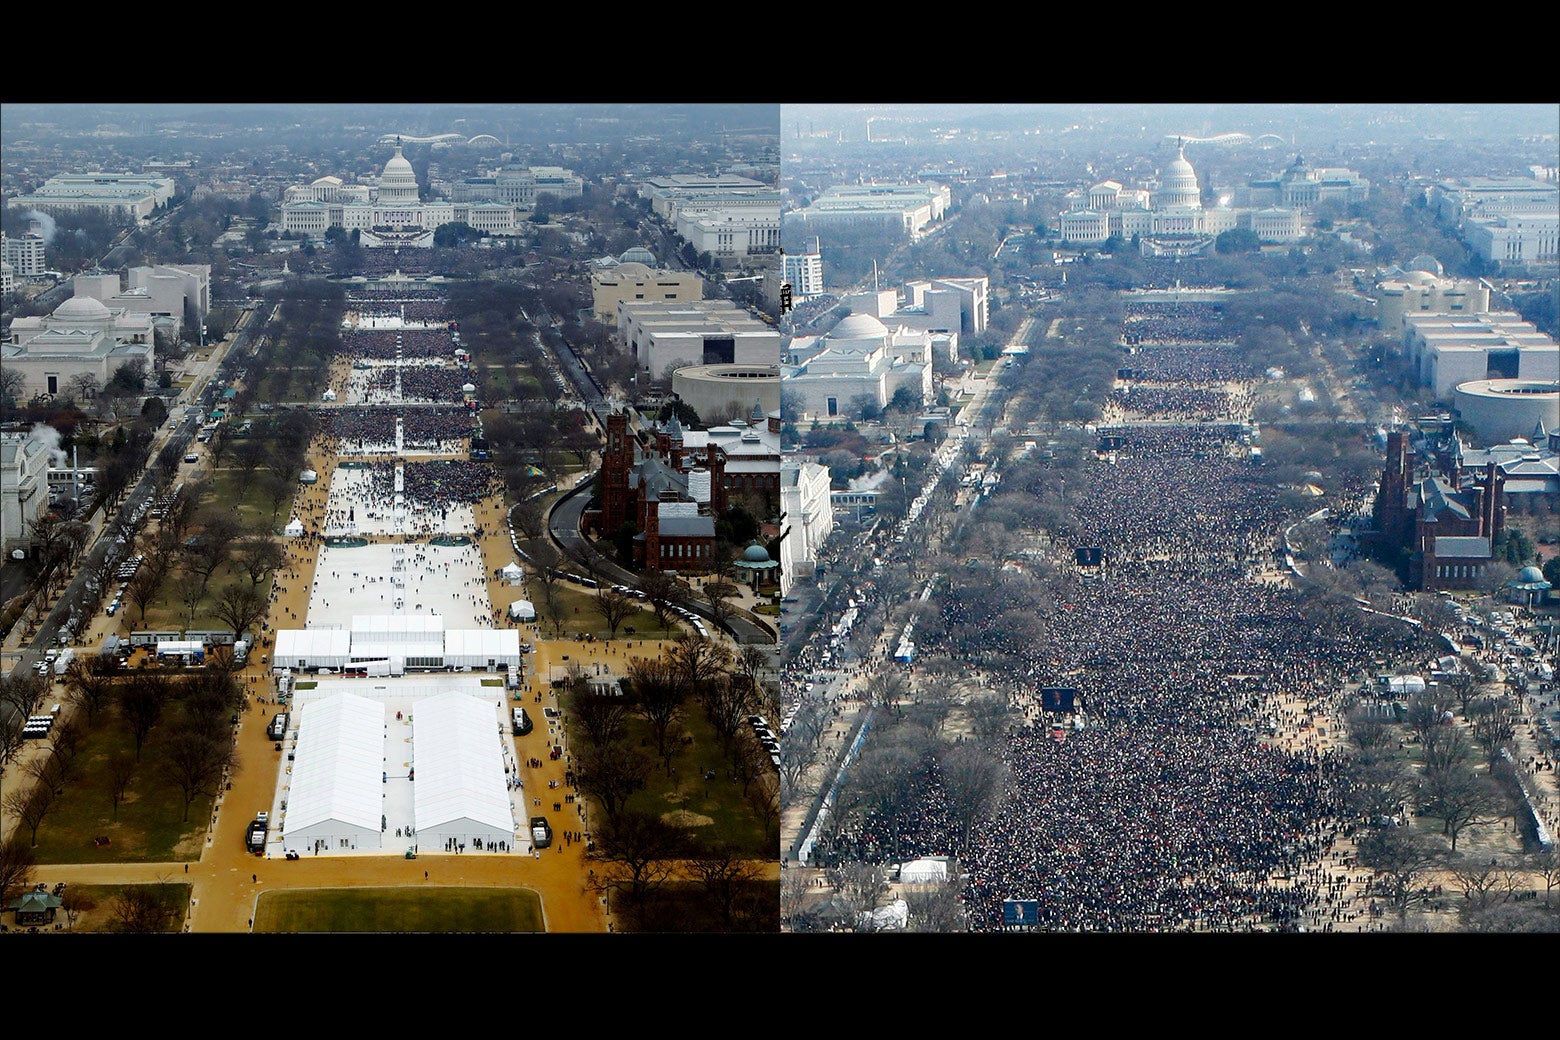 Two photos from the same elevated perspective showing the National Mall